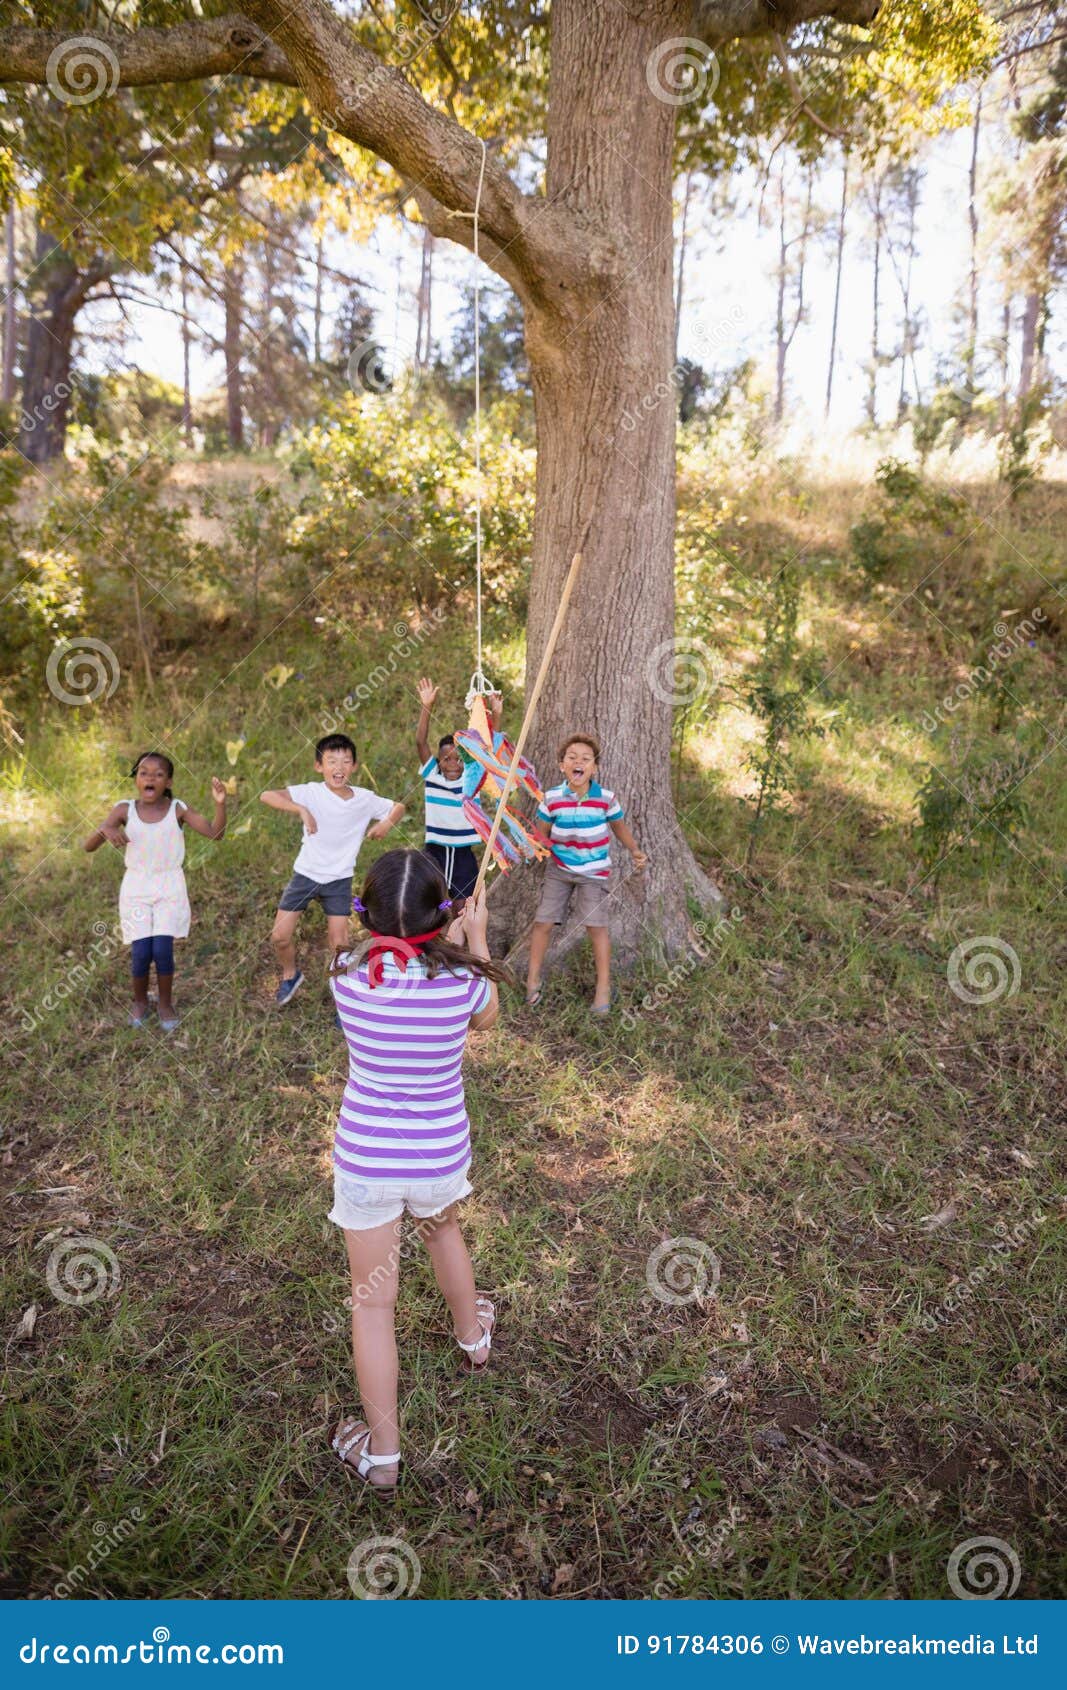 Blindfolded Girl Hitting Pinata Hanging on Tree in Forest Stock